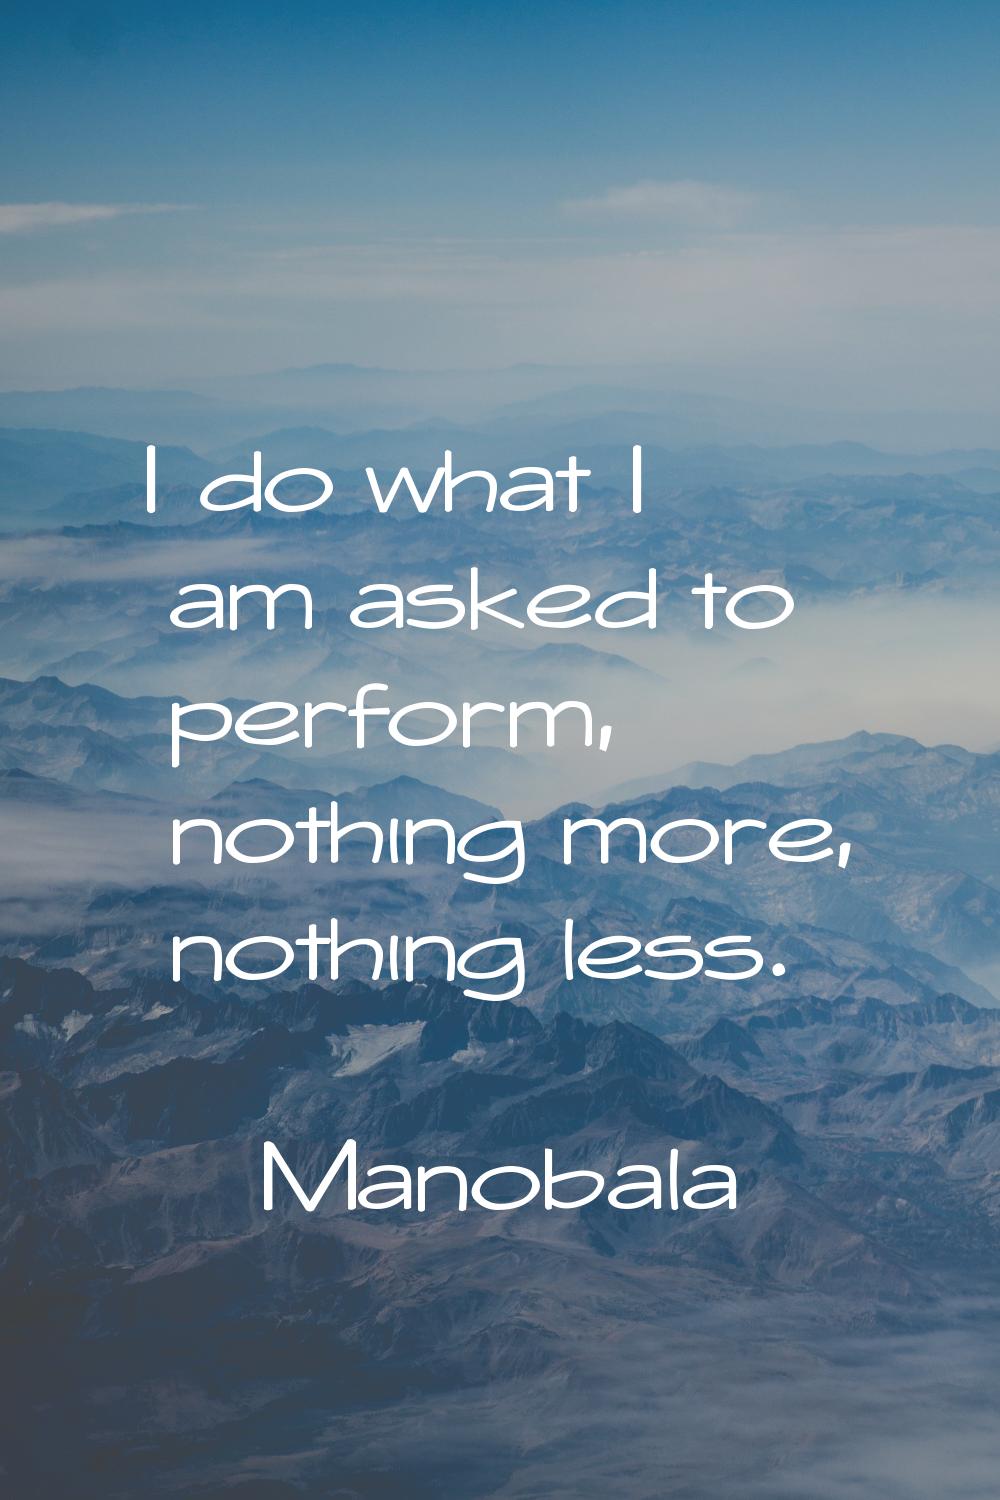 I do what I am asked to perform, nothing more, nothing less.